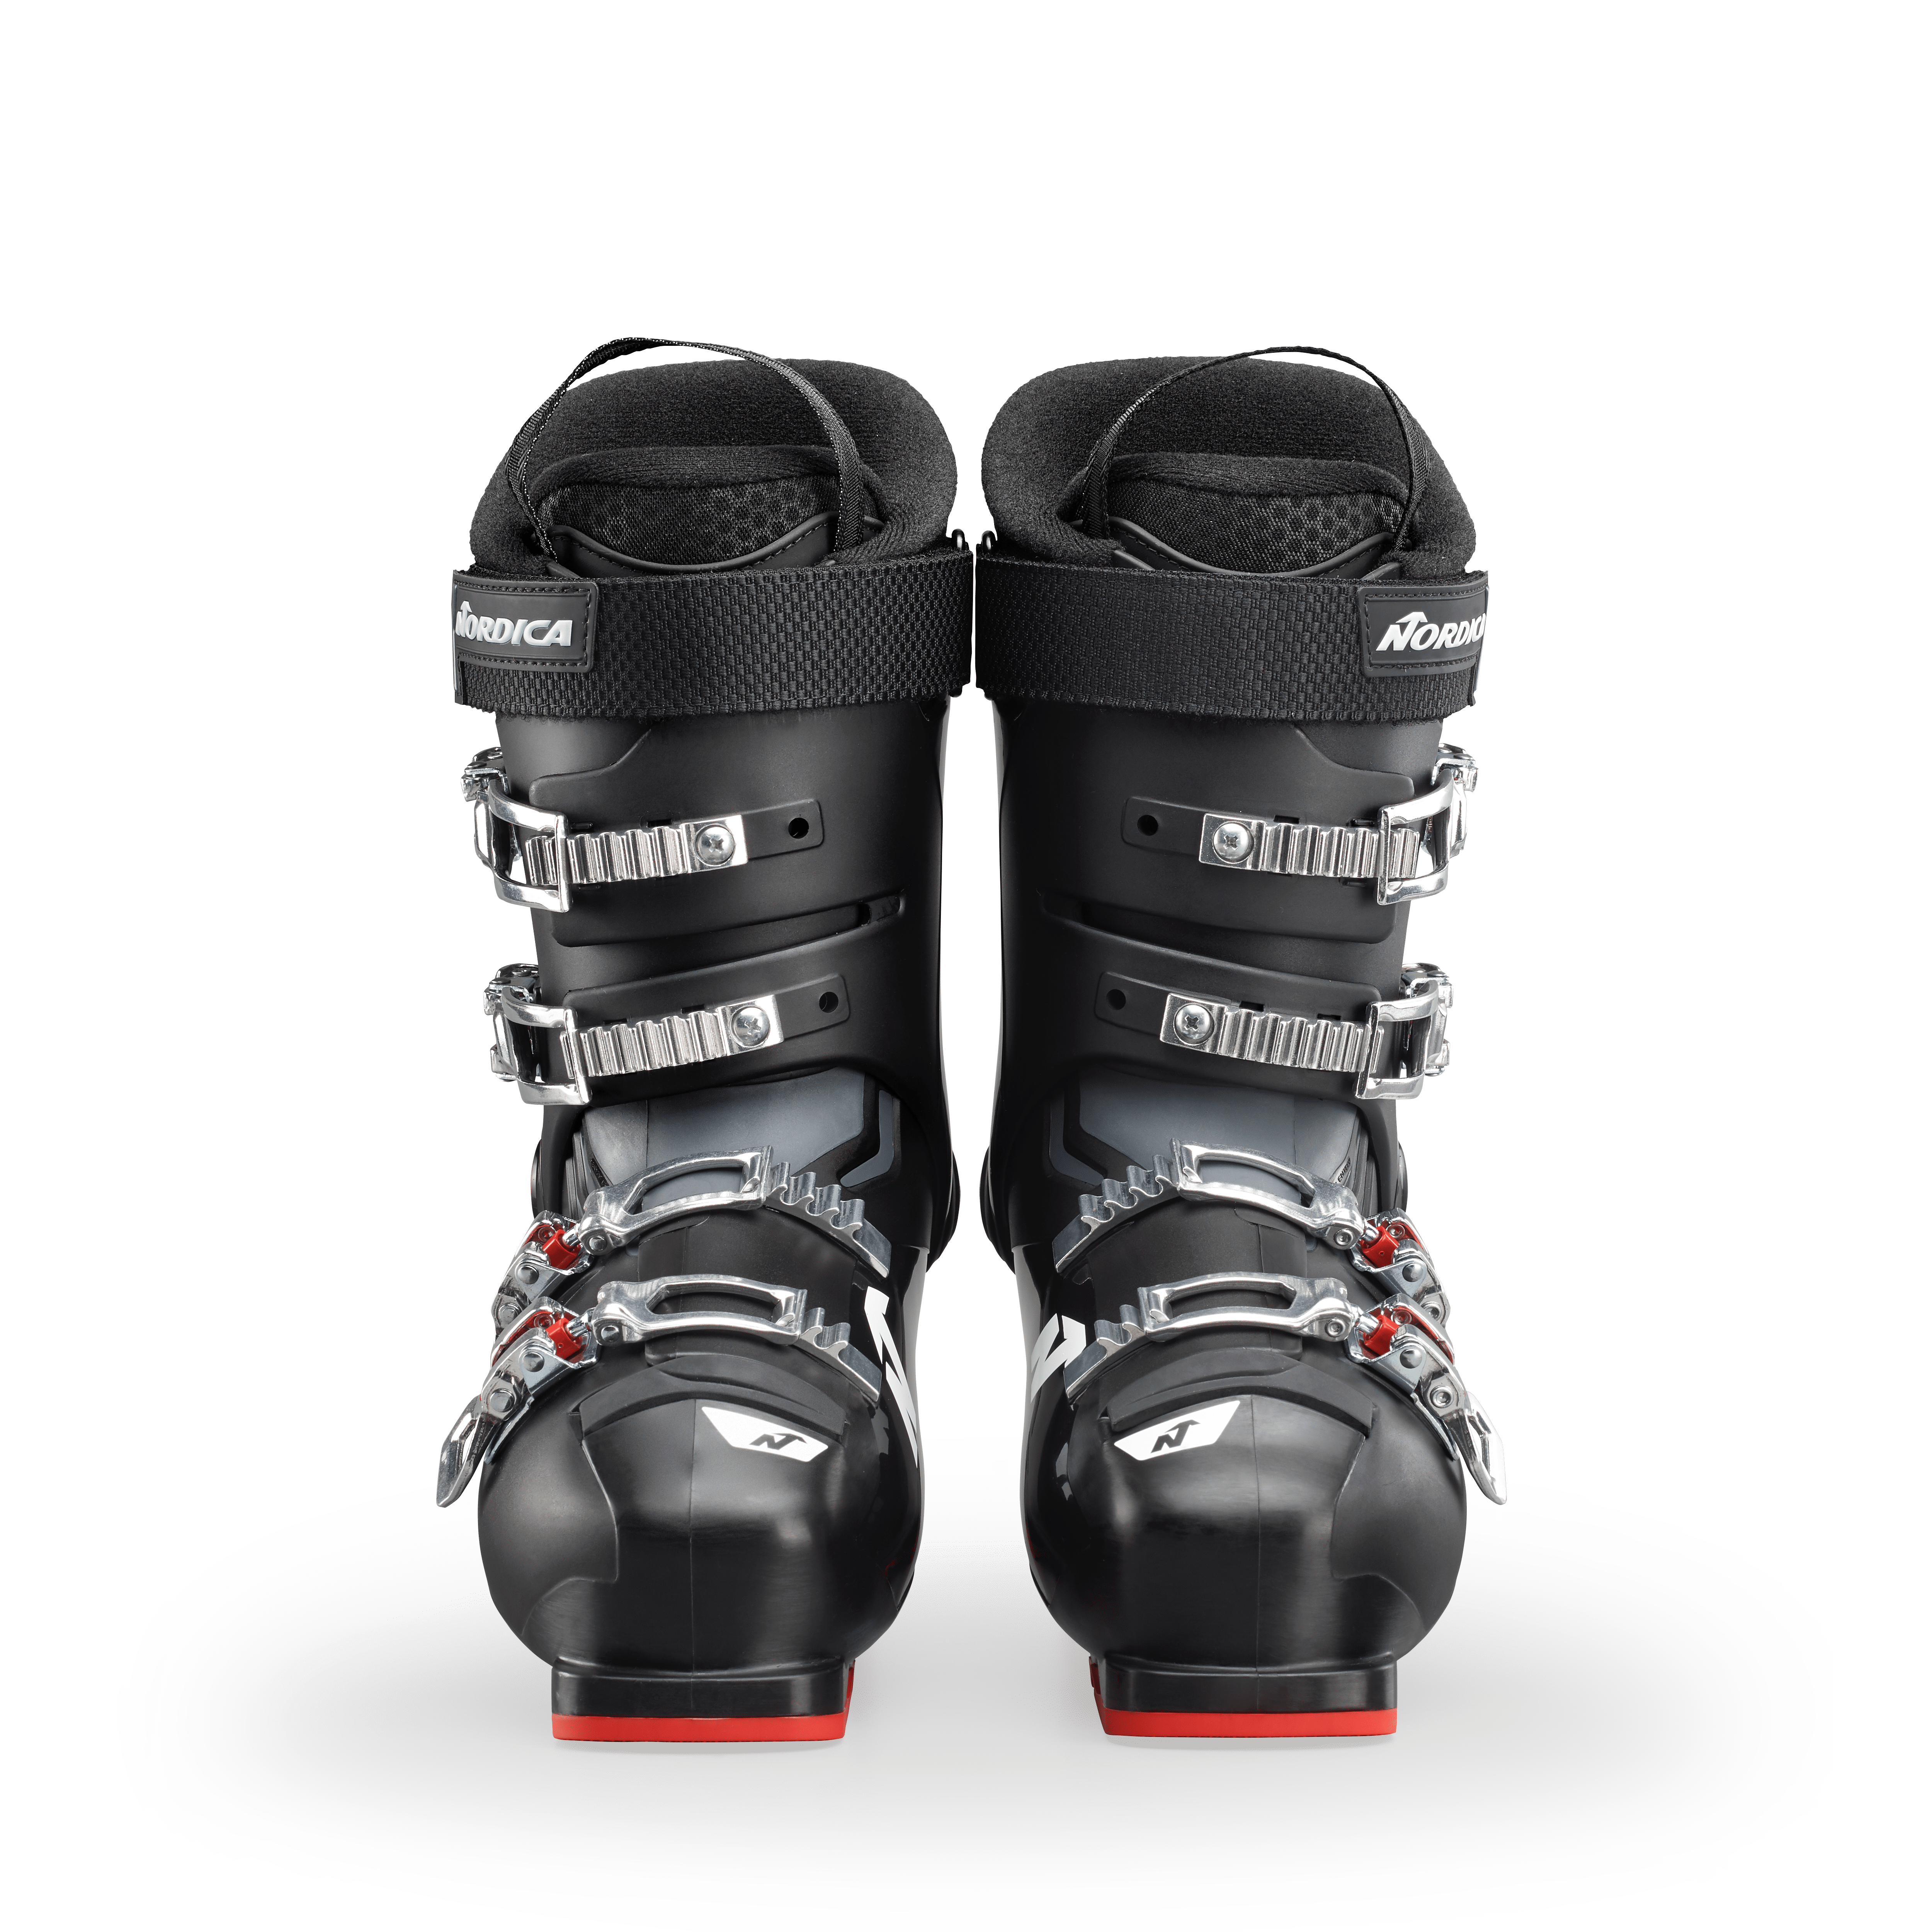 THE CRUISE 80 Nordica - Skis and Boots – Official website